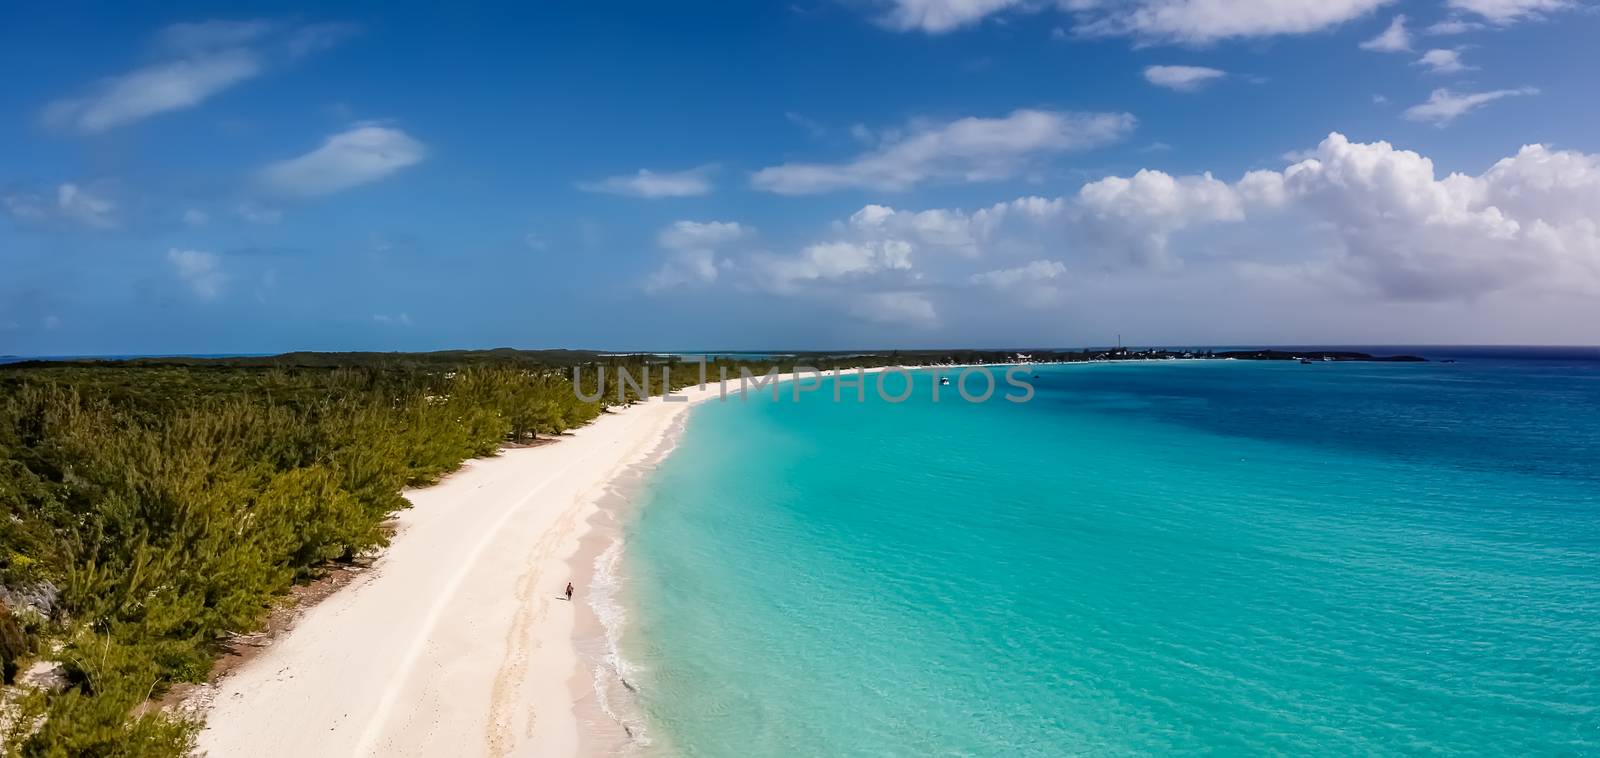 Beautiful aerial view of a sandy beach on Half Moon Cay island in the Bahamas